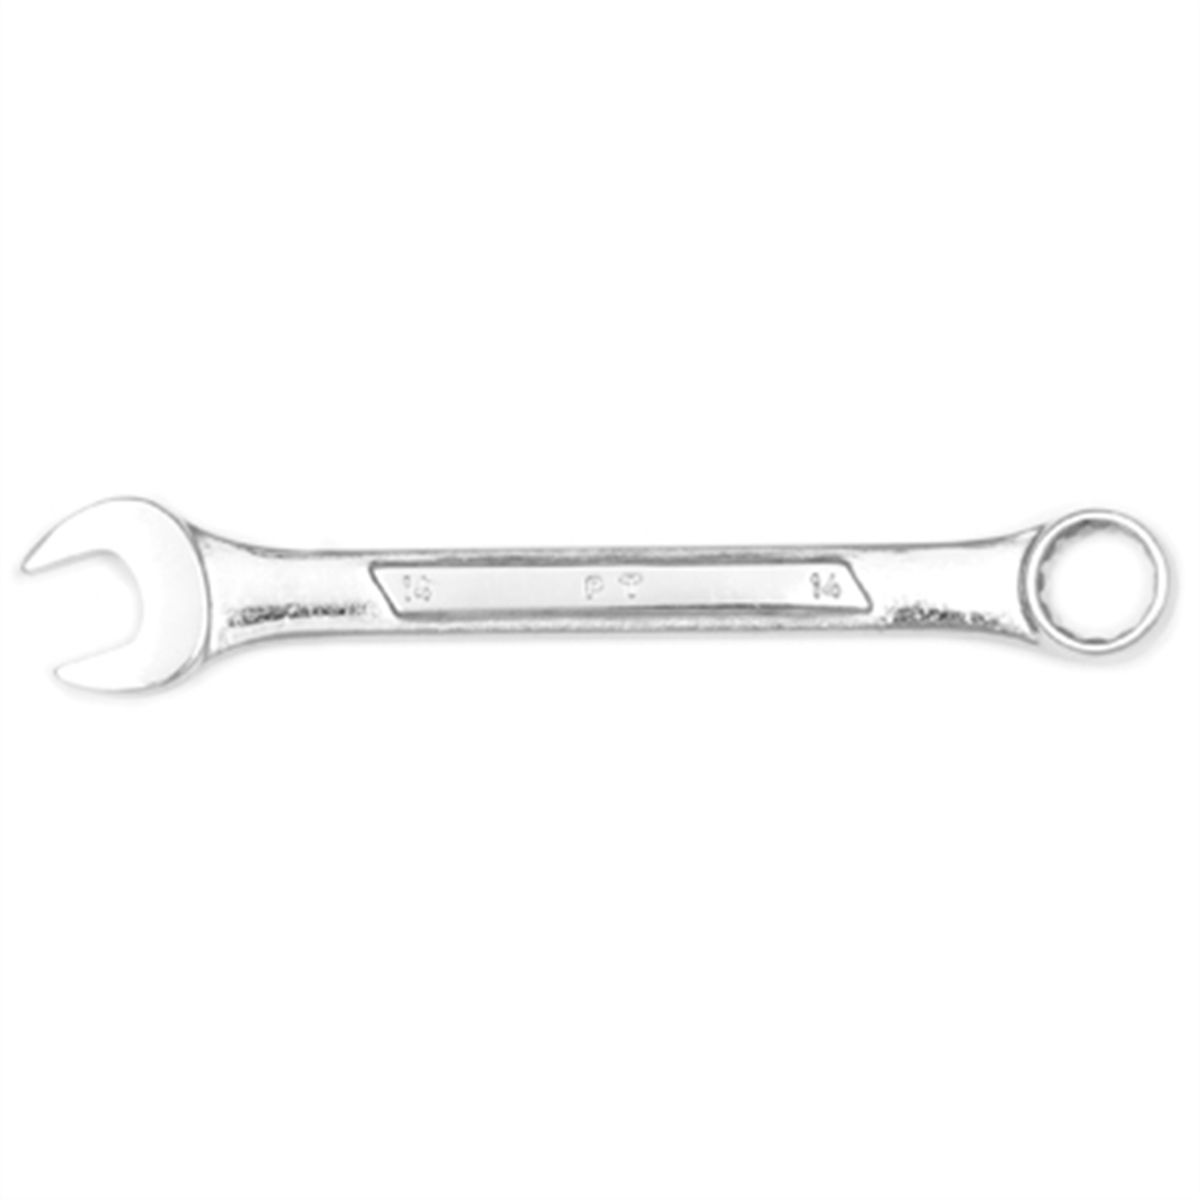 14mm Metric Comb Wrench